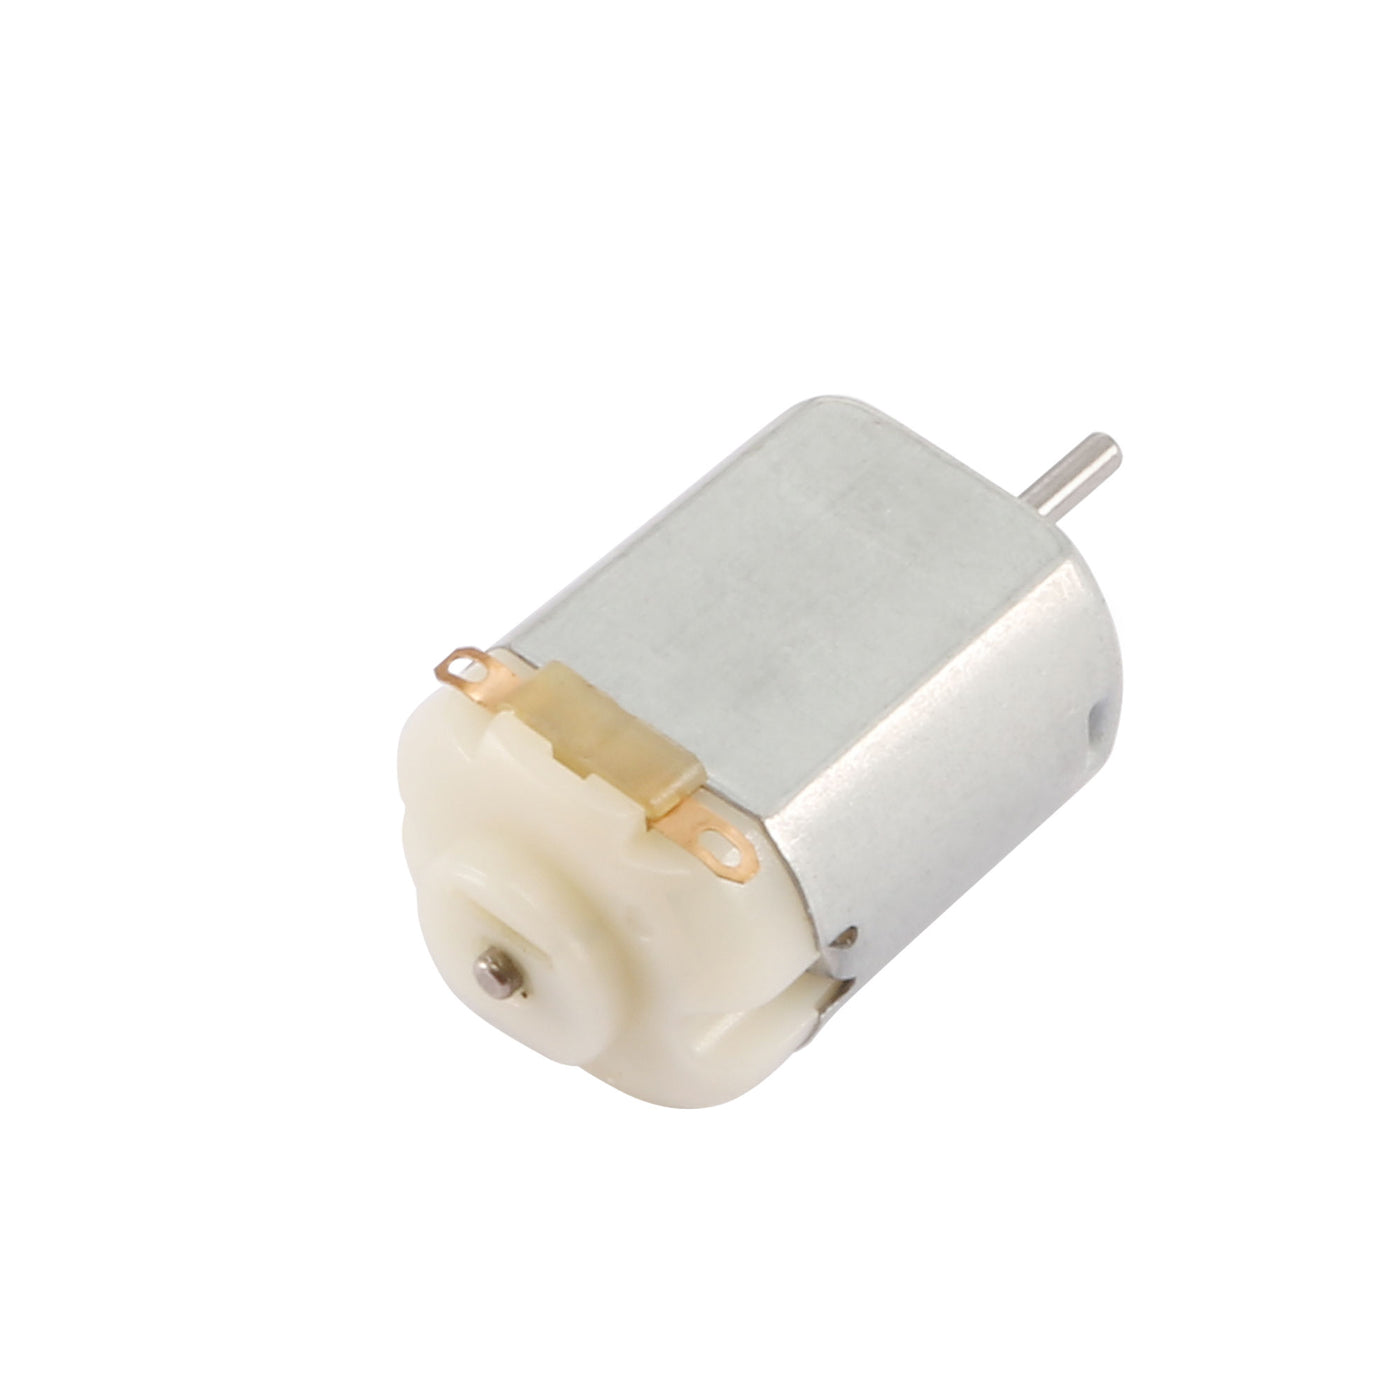 uxcell Uxcell DC Motor 4V 20000RPM 0.2A Electric Motor Round Shaft for RC Boat Model DIY